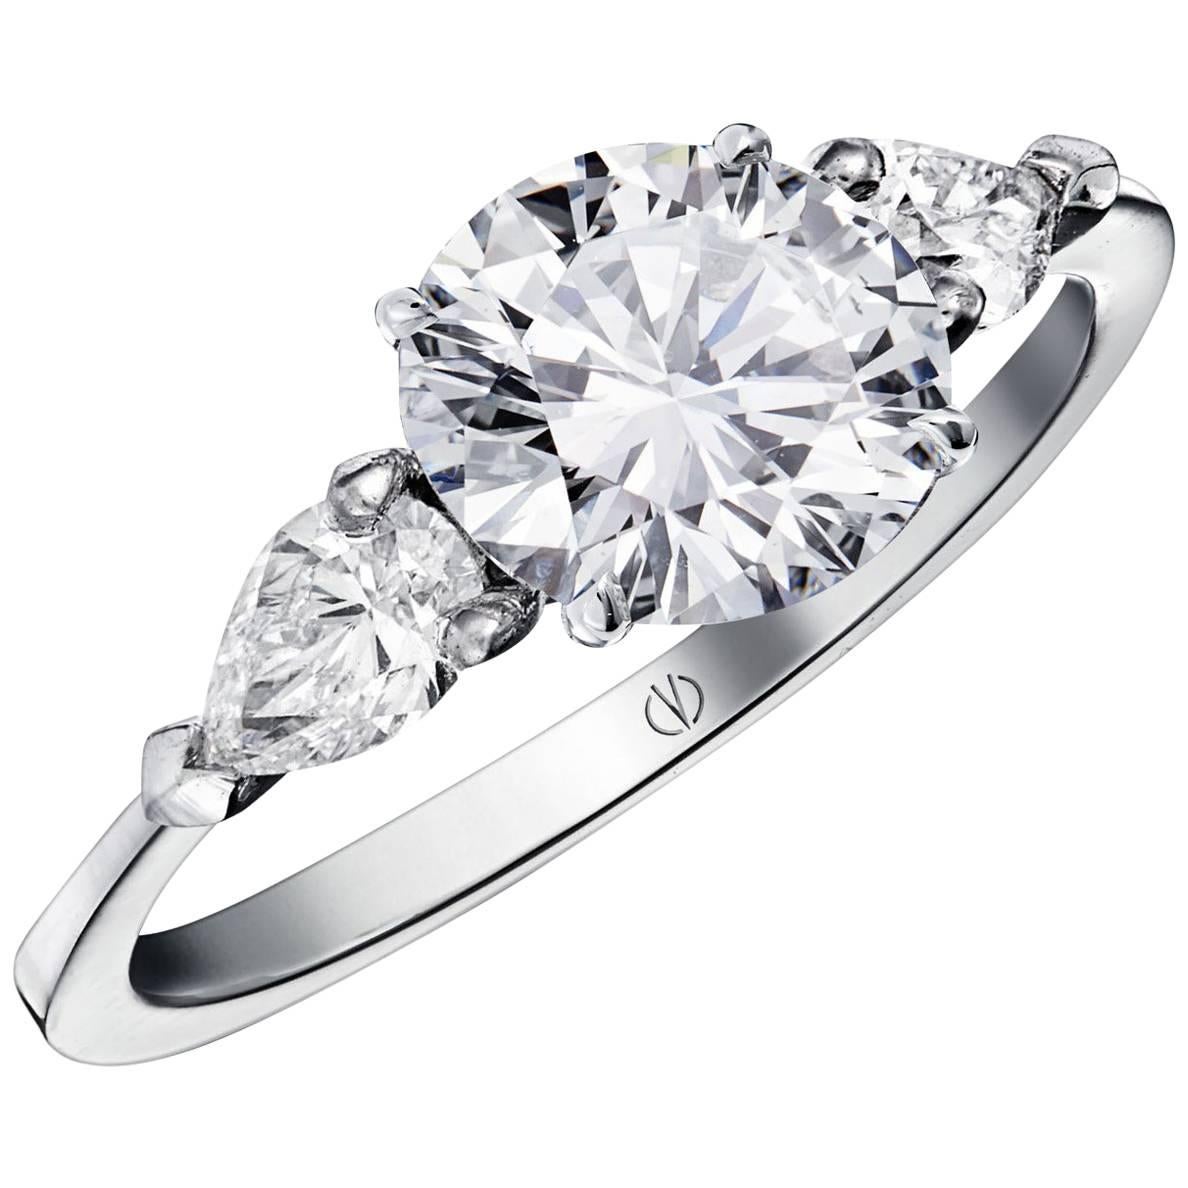 So Precious Classical 2, 47ct and 2 Pear Shape Diamond Ring by  Valerie Danenberg For Sale